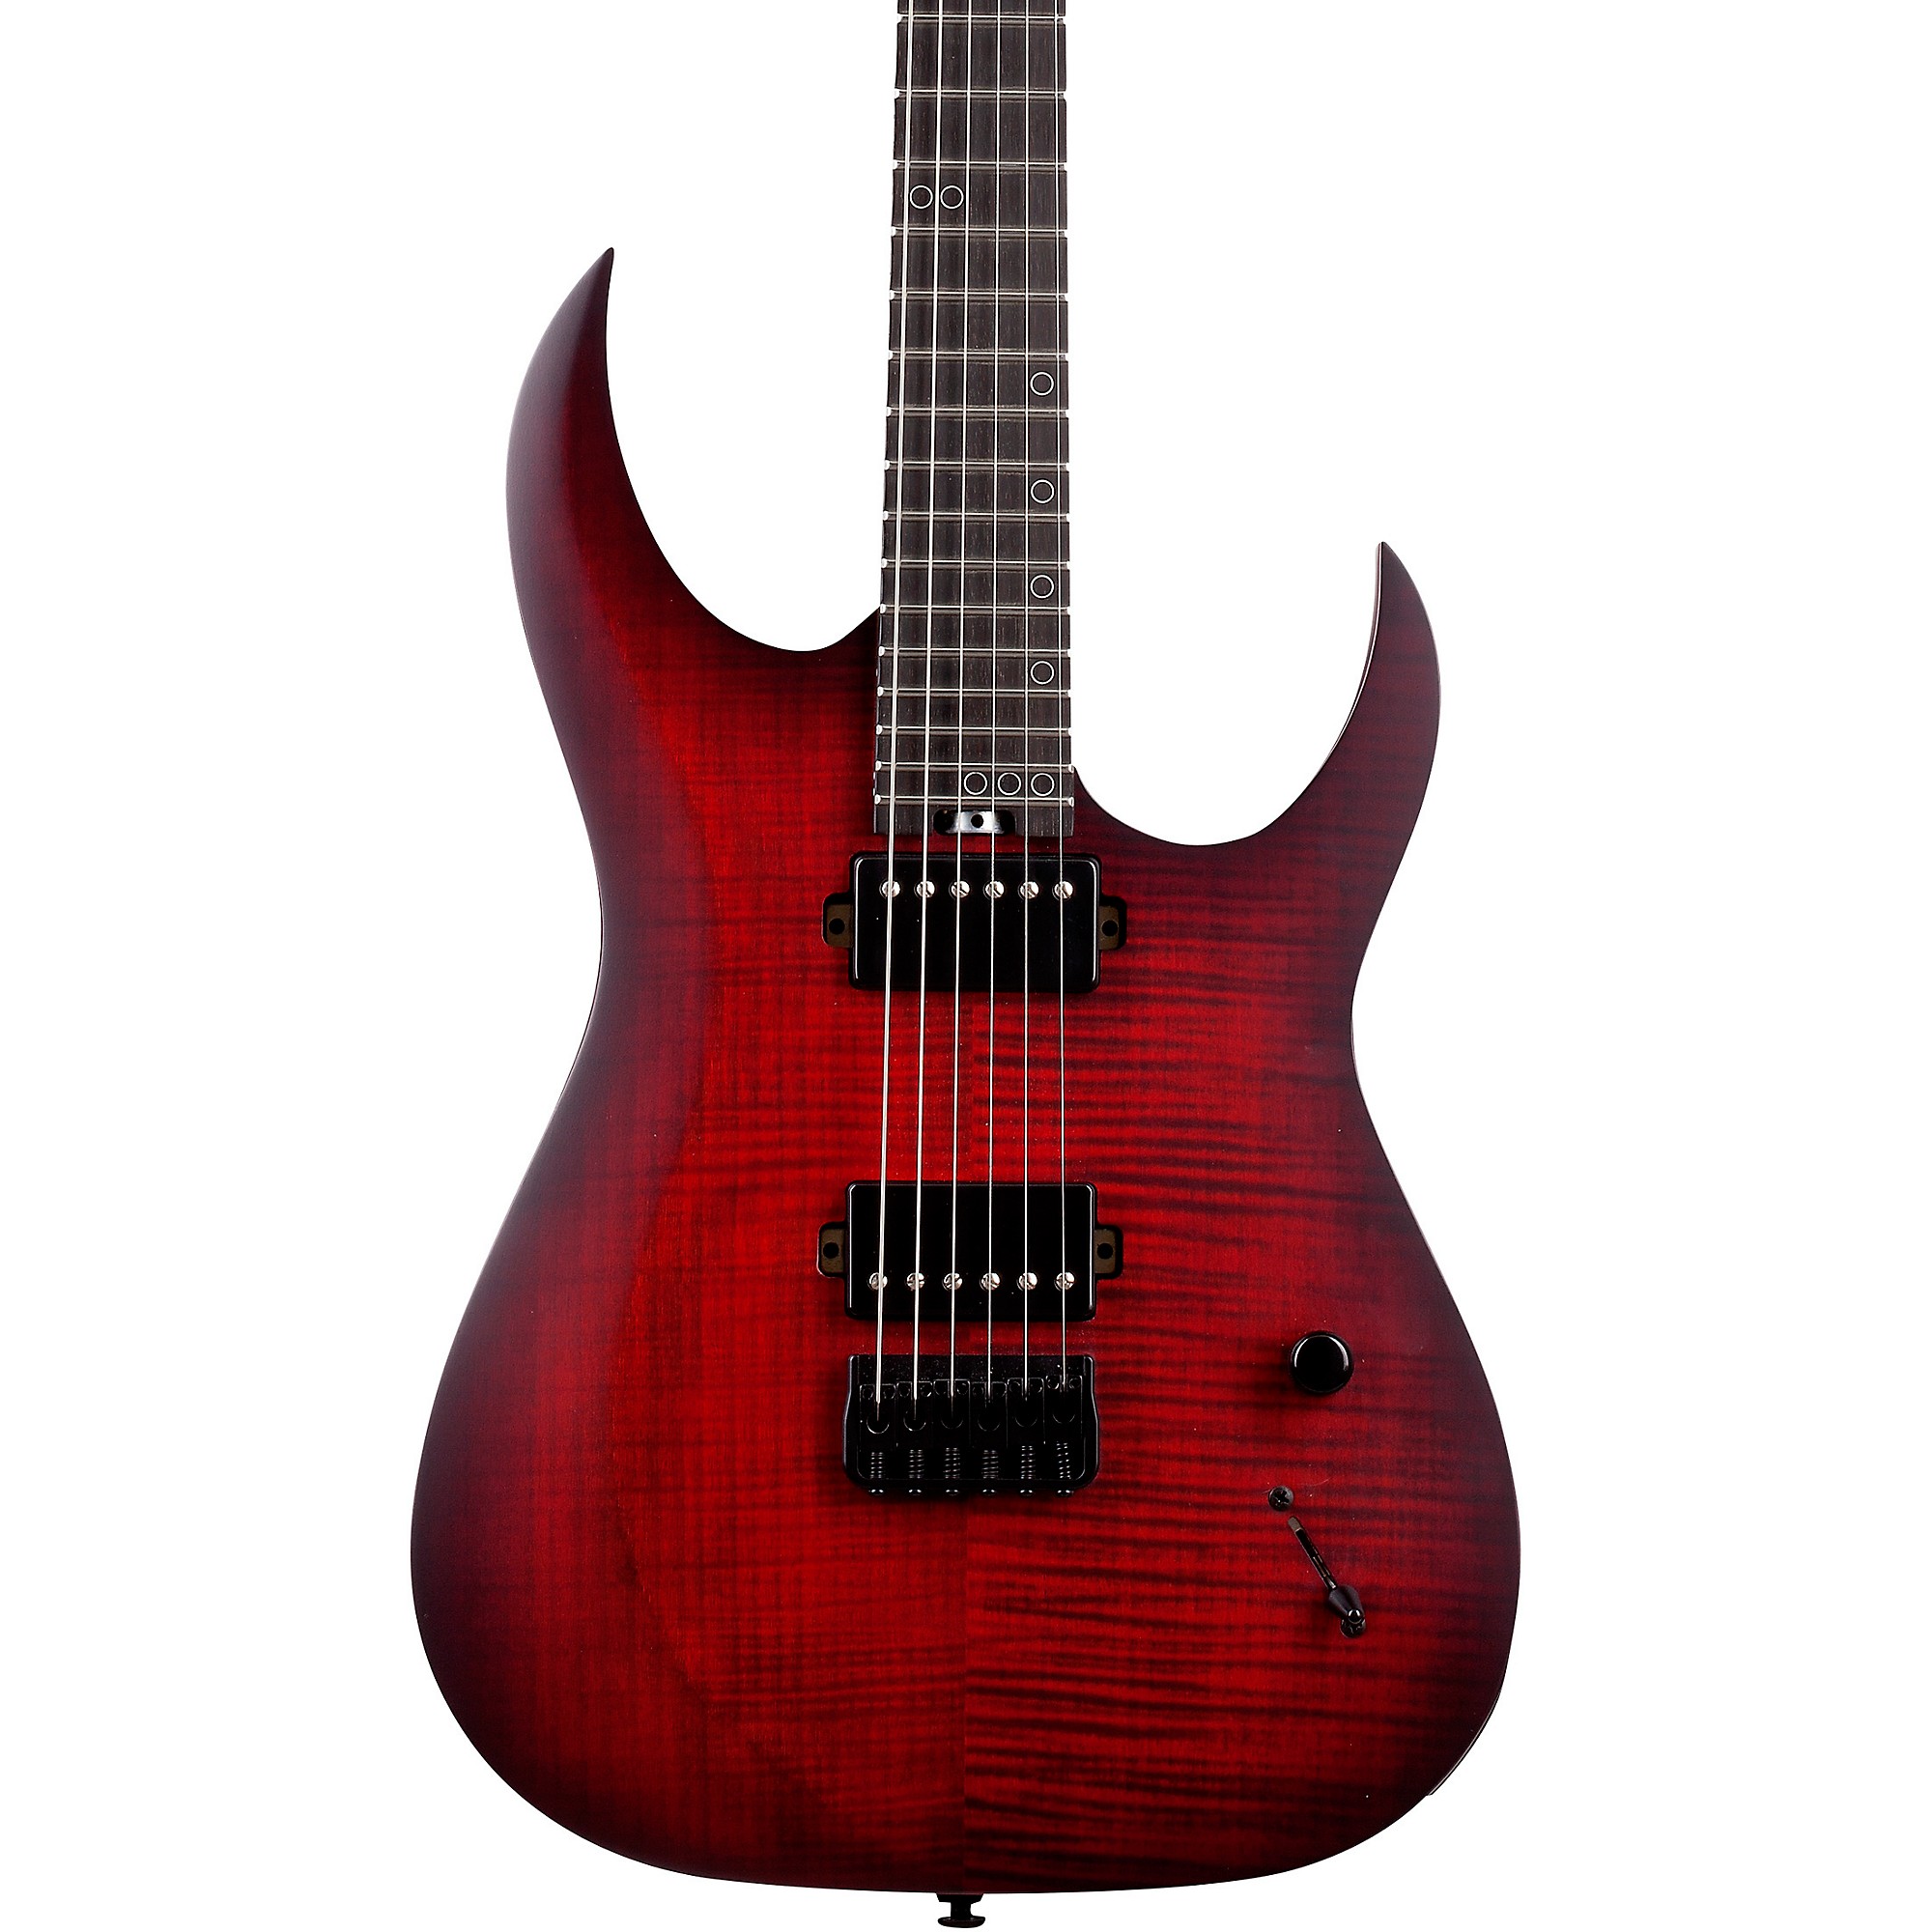 Schecter Guitar Research Schecter Guitar Research Sunset Extreme Electric  Guitar